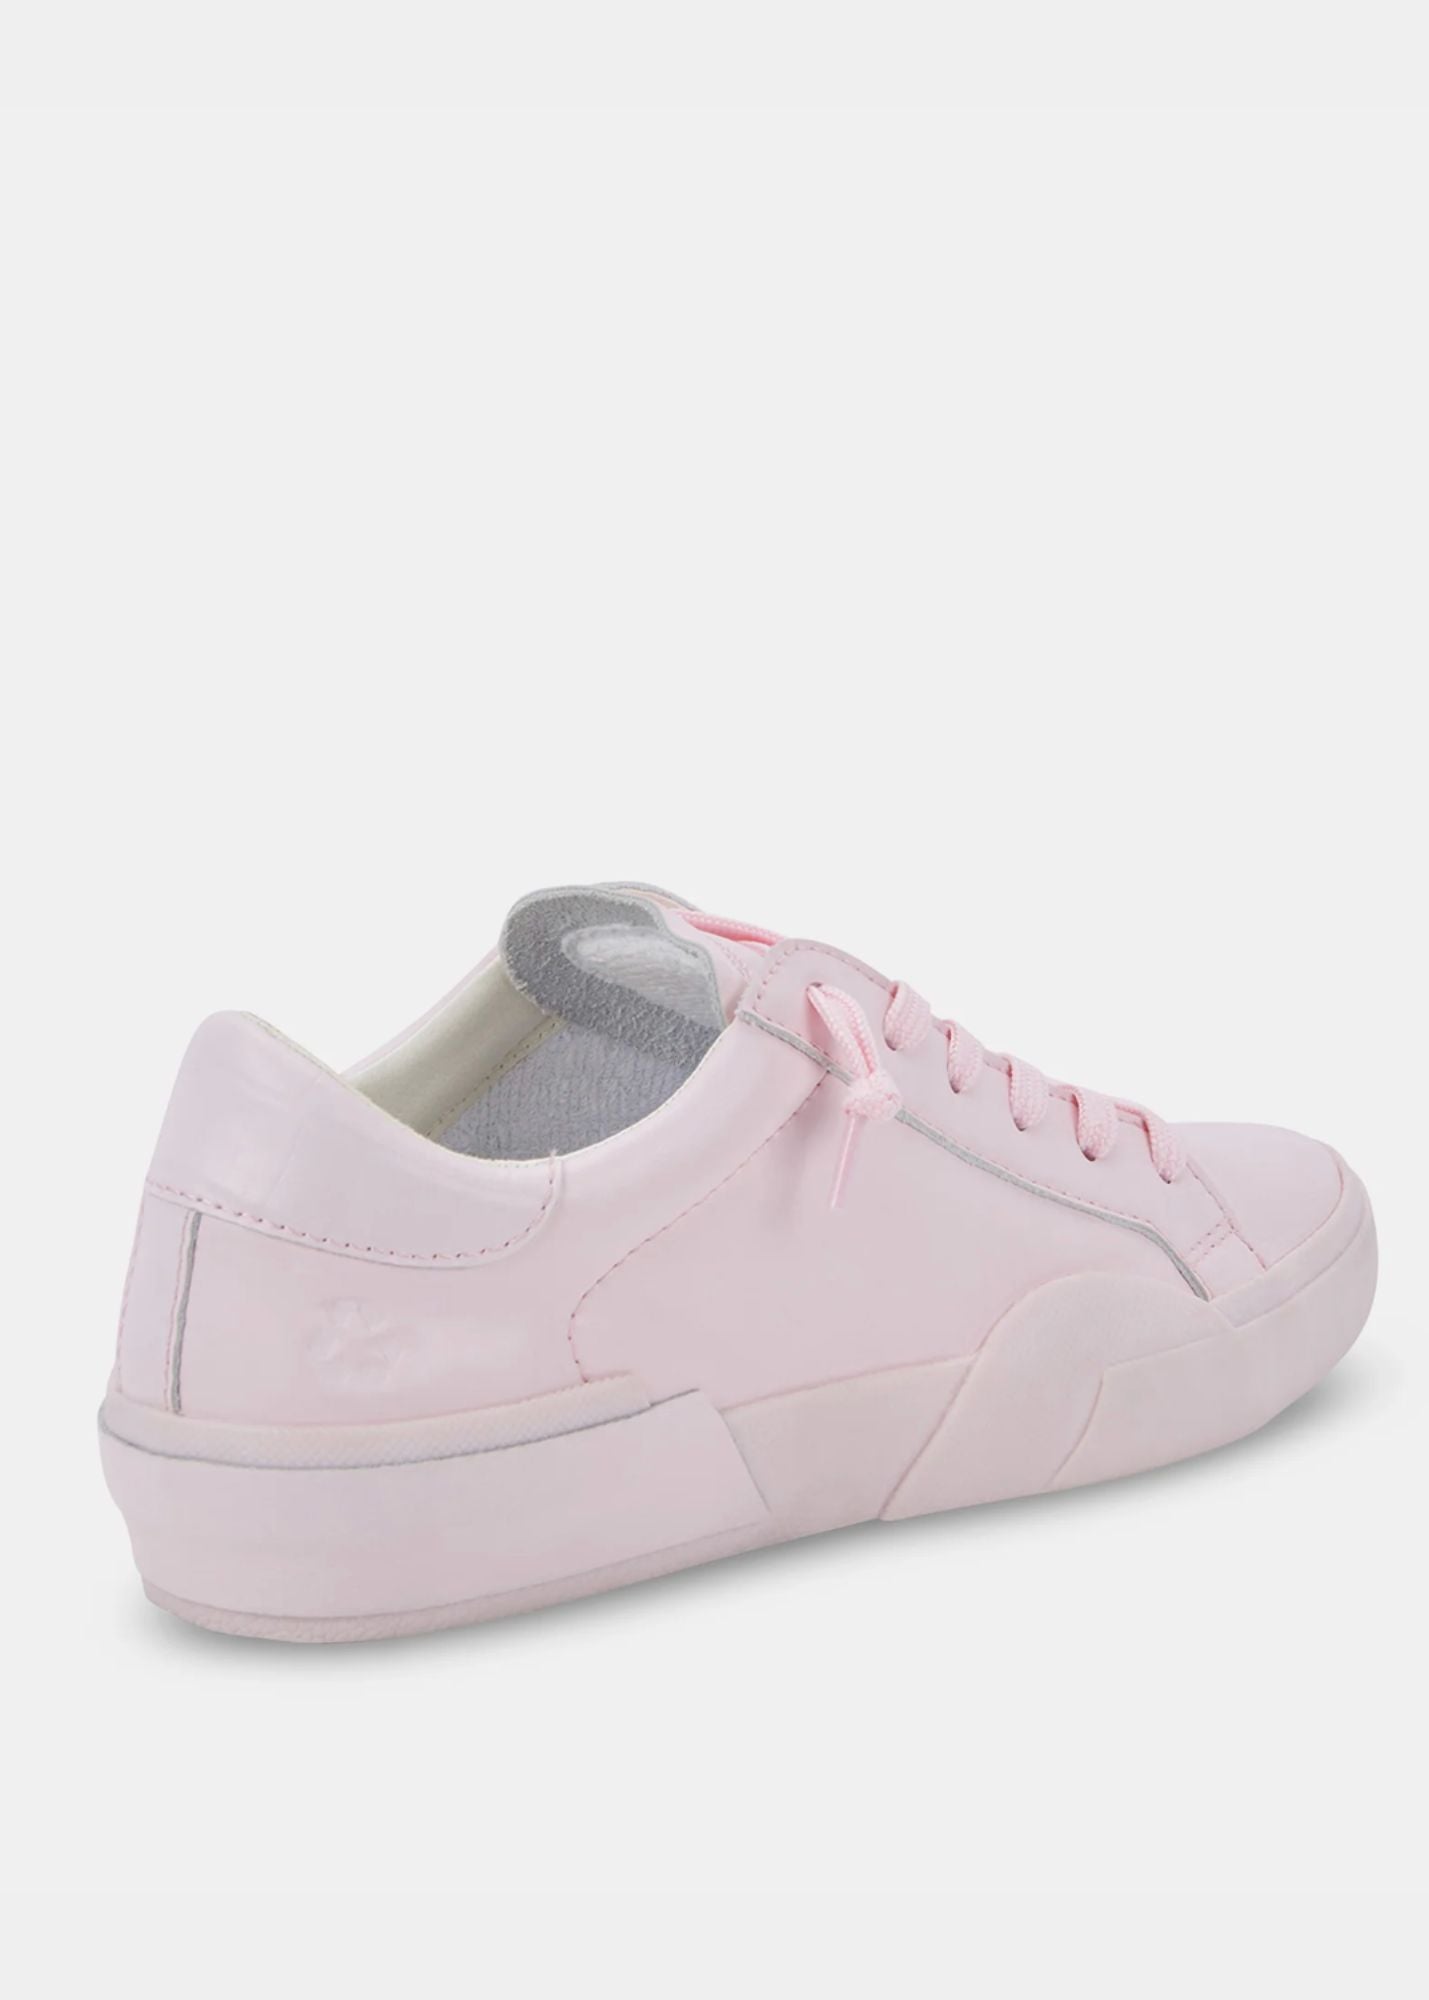 Zina 360  Light Pink Leather Sneakers Shoes